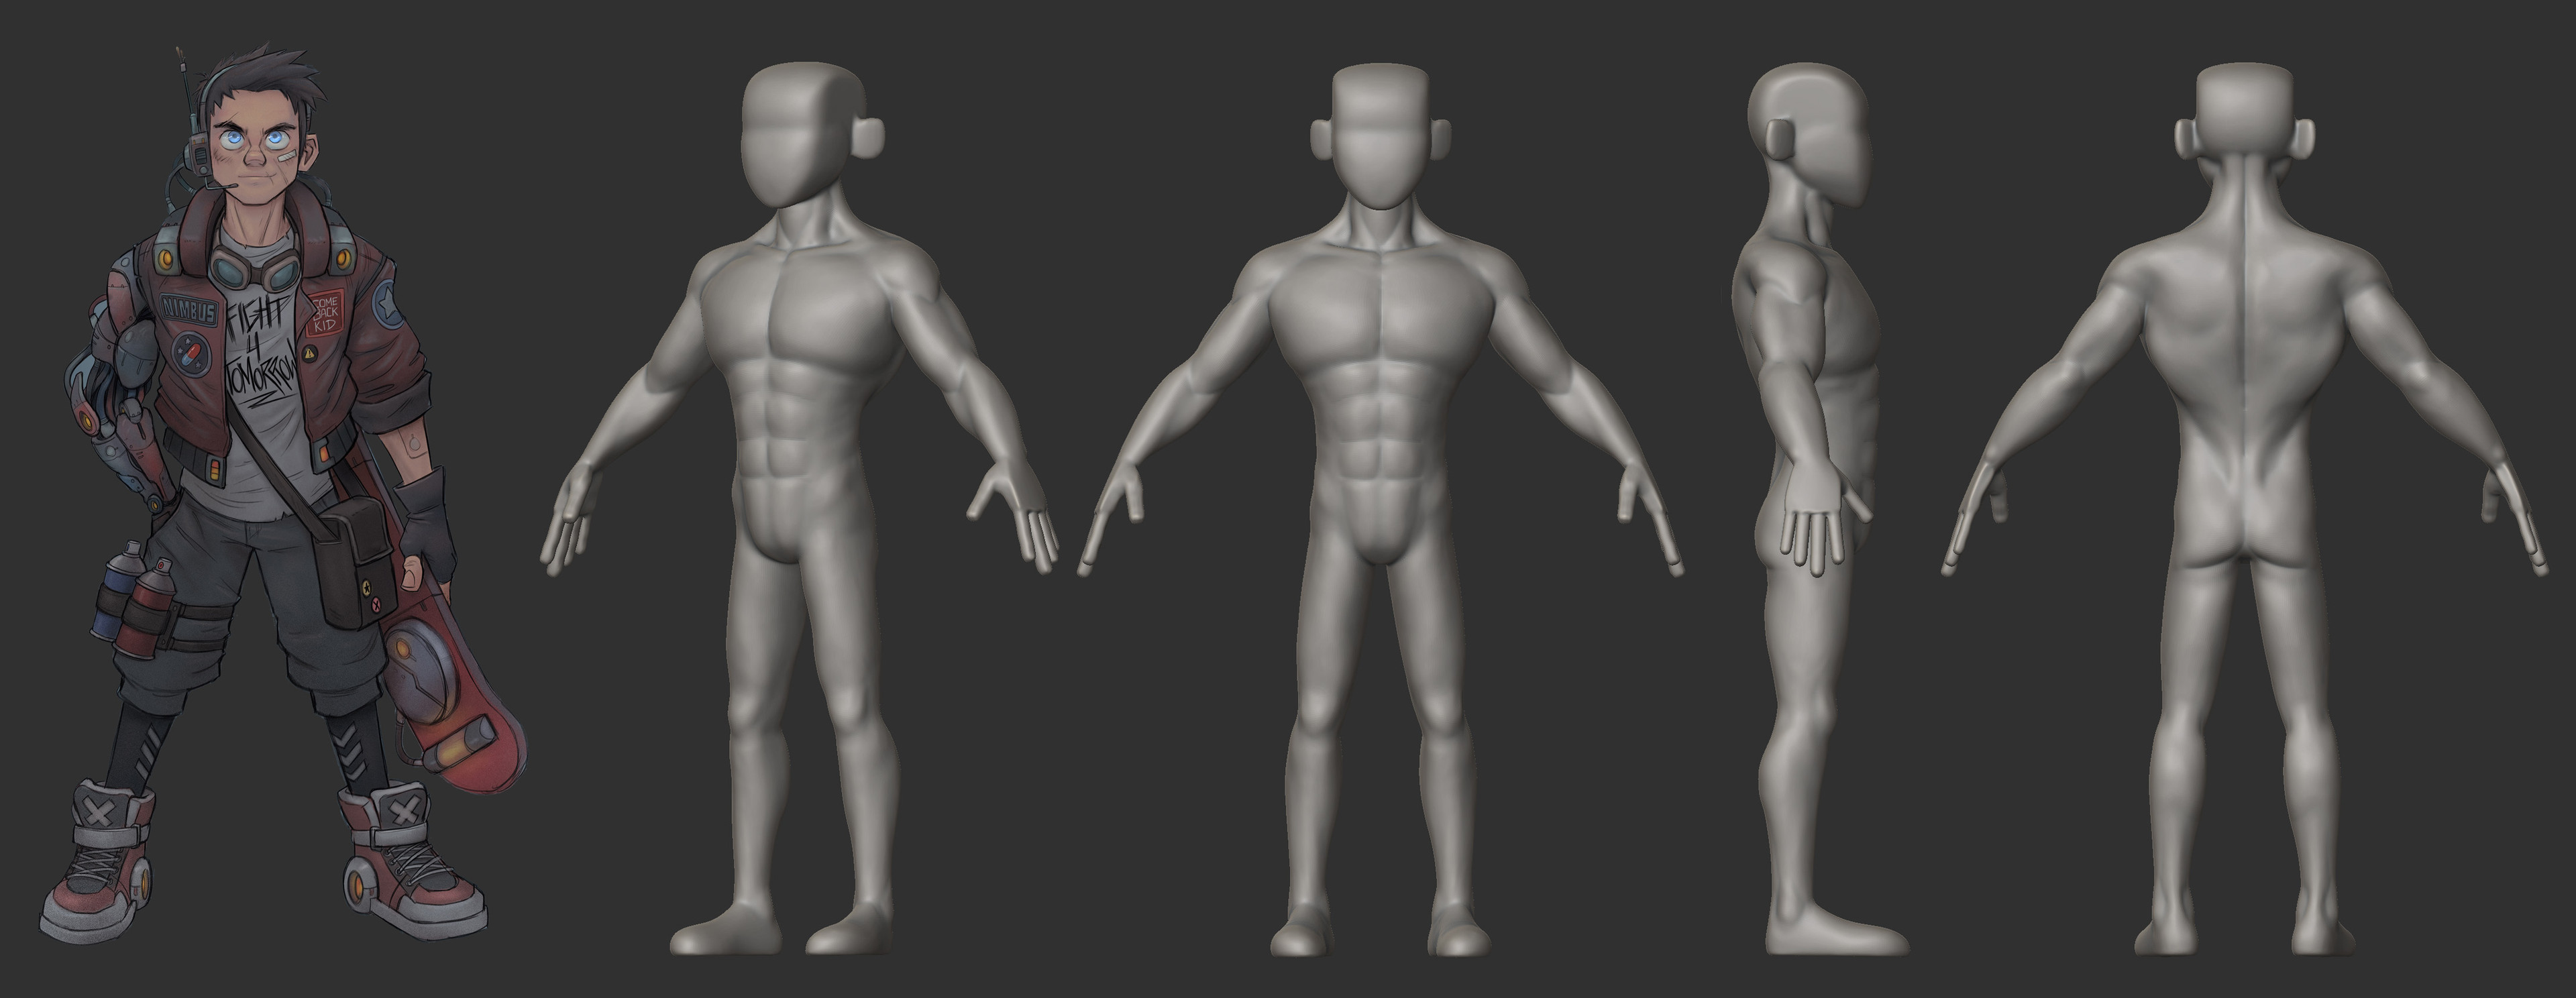 Body stitched together and secondary detail sculpted. 